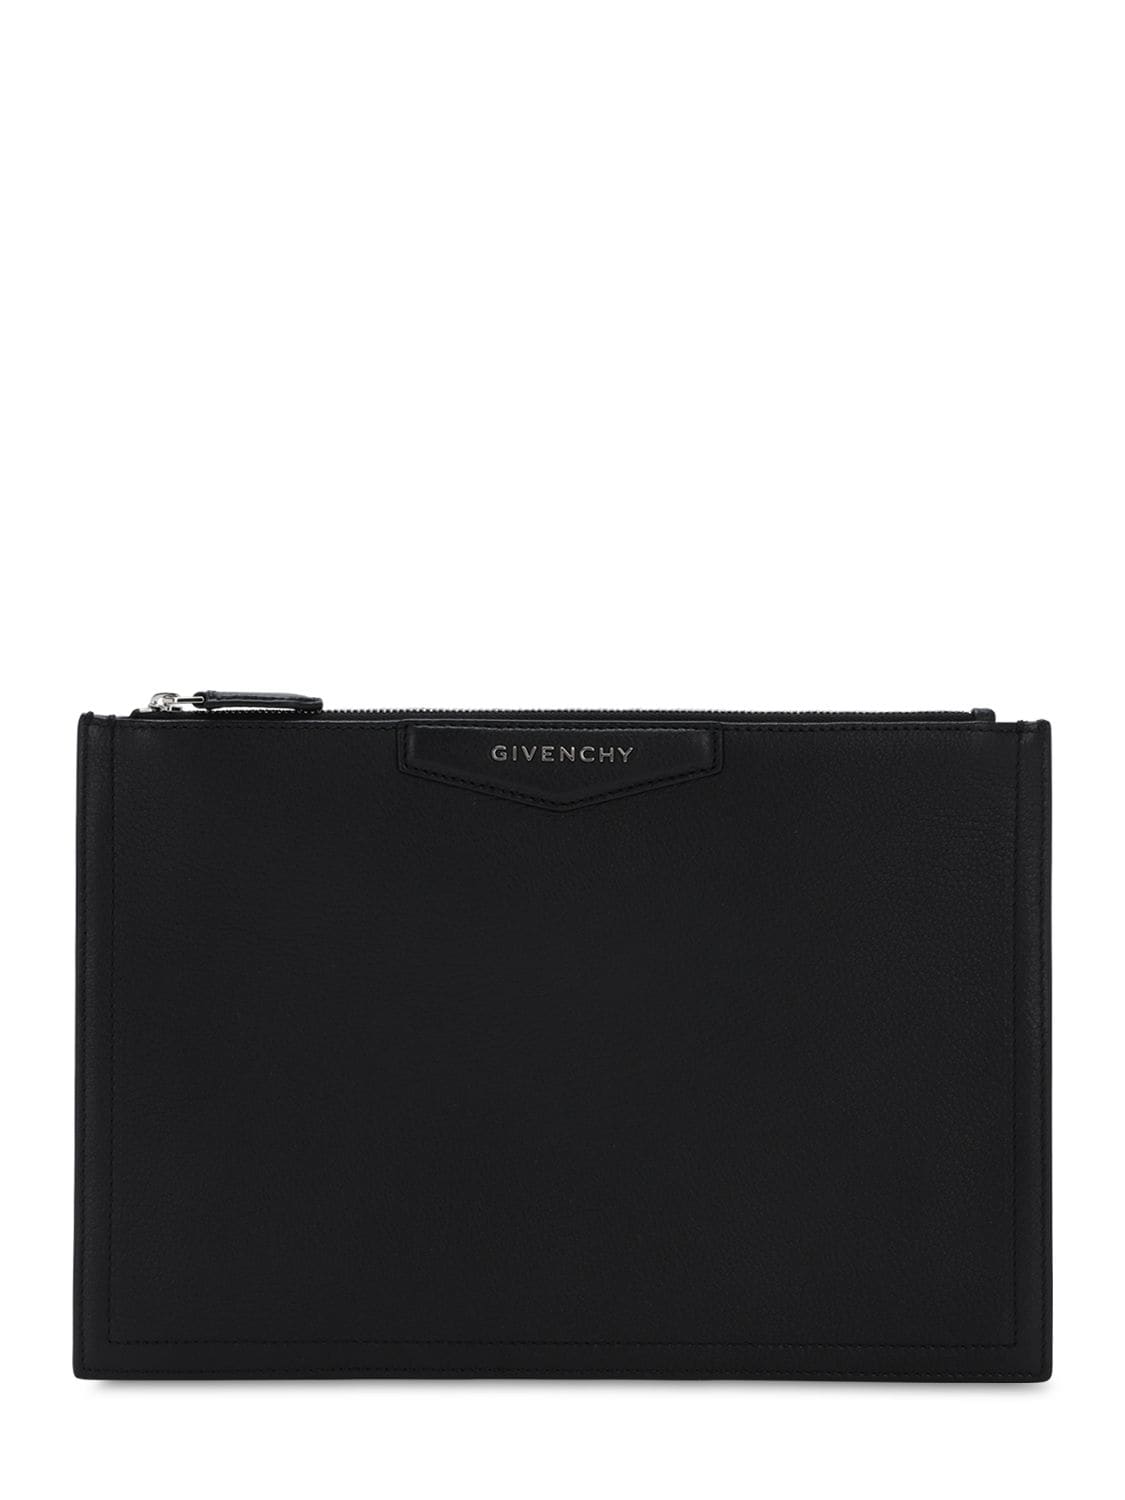 Givenchy Antigona Md Leather Pouch In Black